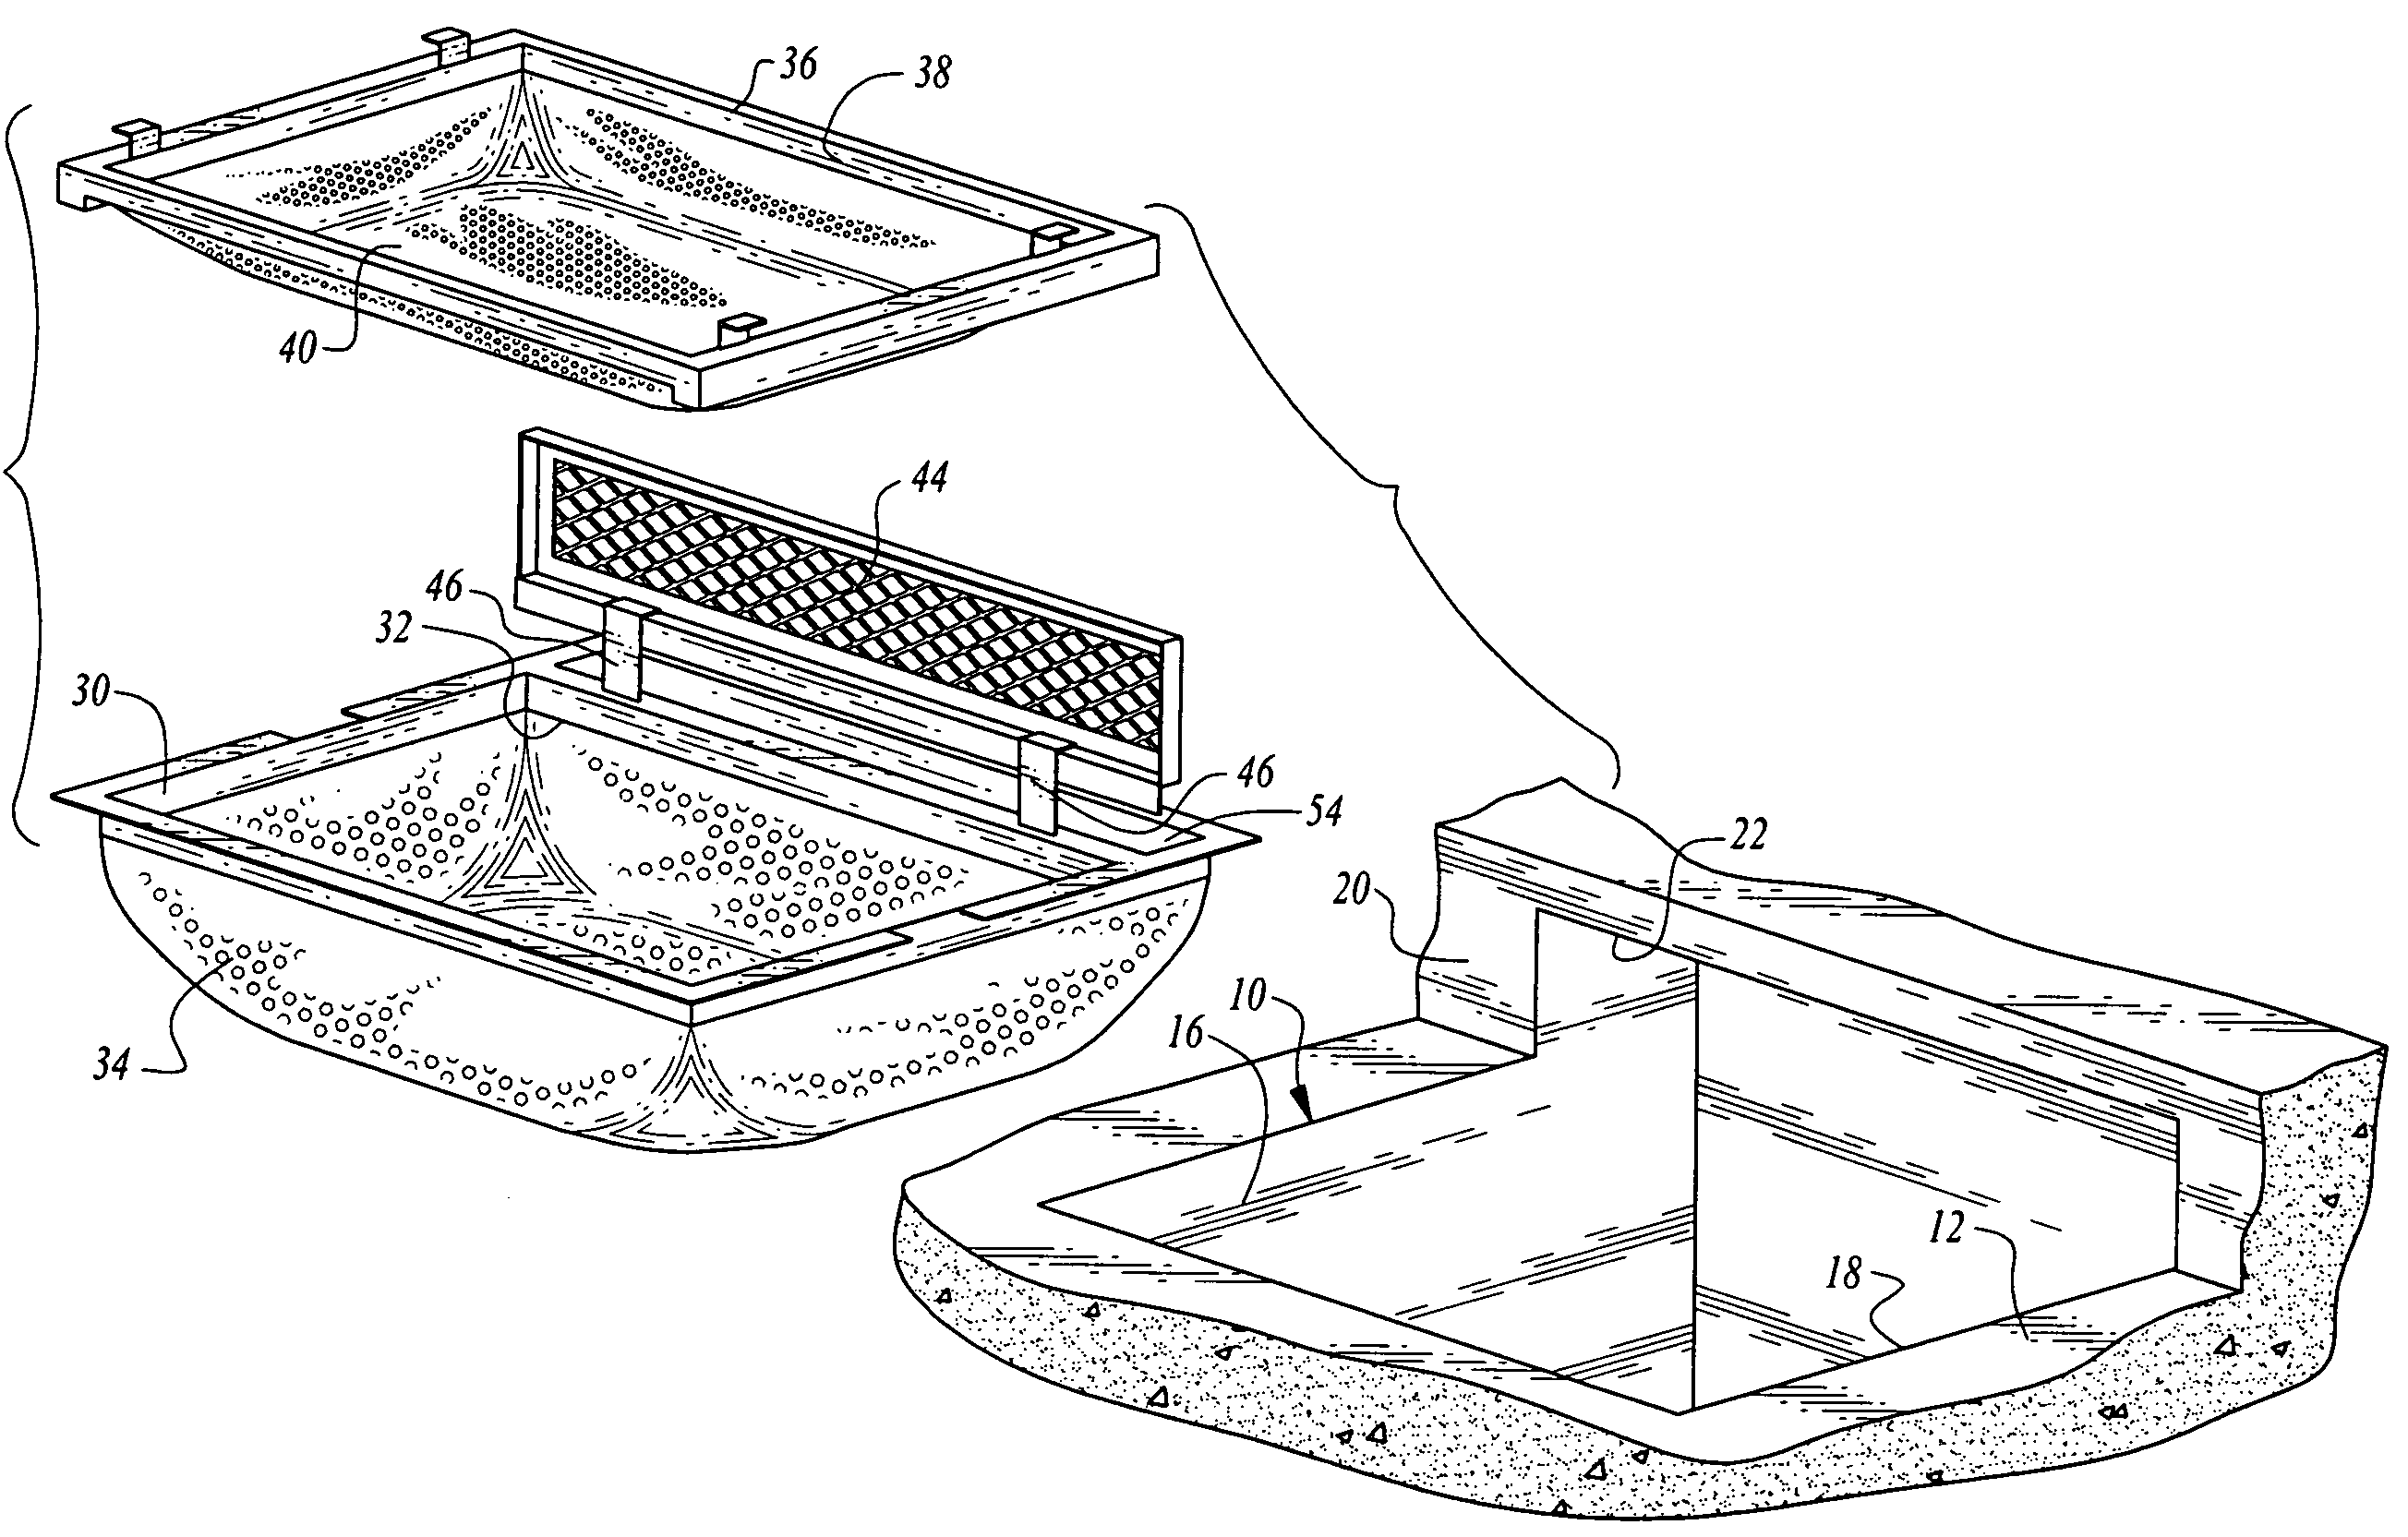 Apparatus for filtering out and collecting debris at a storm drain